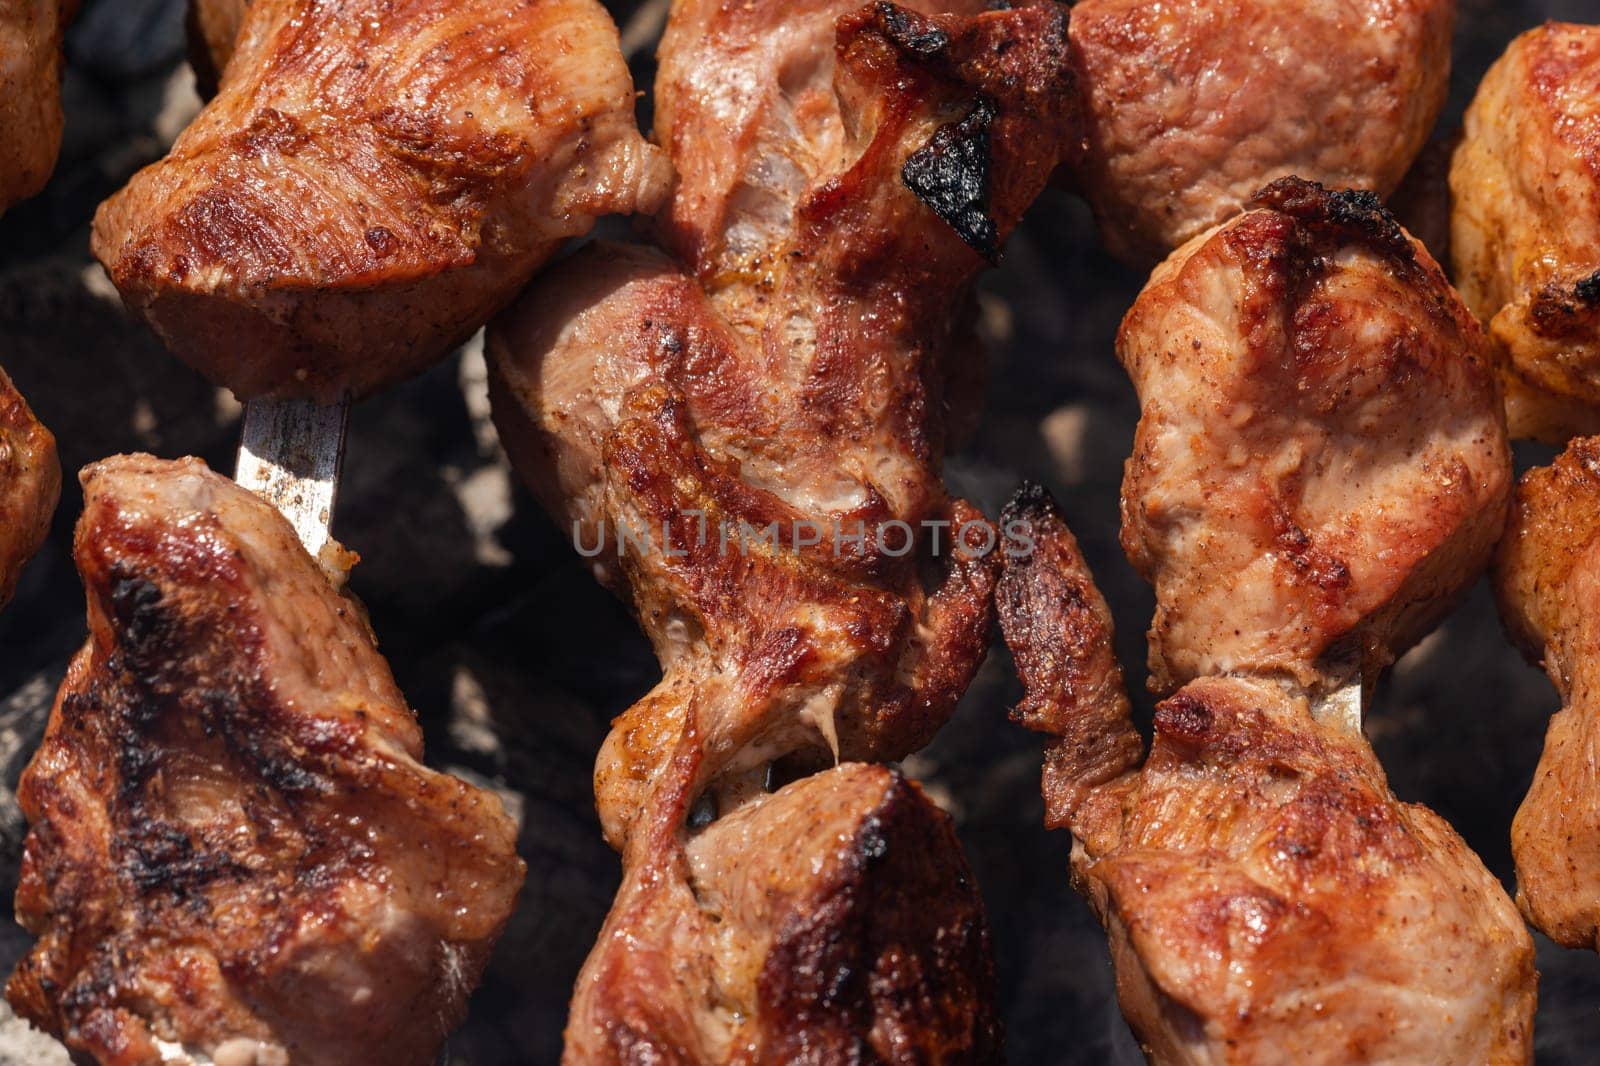 Cooking during summer picnic - appetizing juicy pork shish kebabs on metal skewers on charcoal grill with fragrant fire smoke. Close-up view, selective focus on tasty pieces of roast meat.